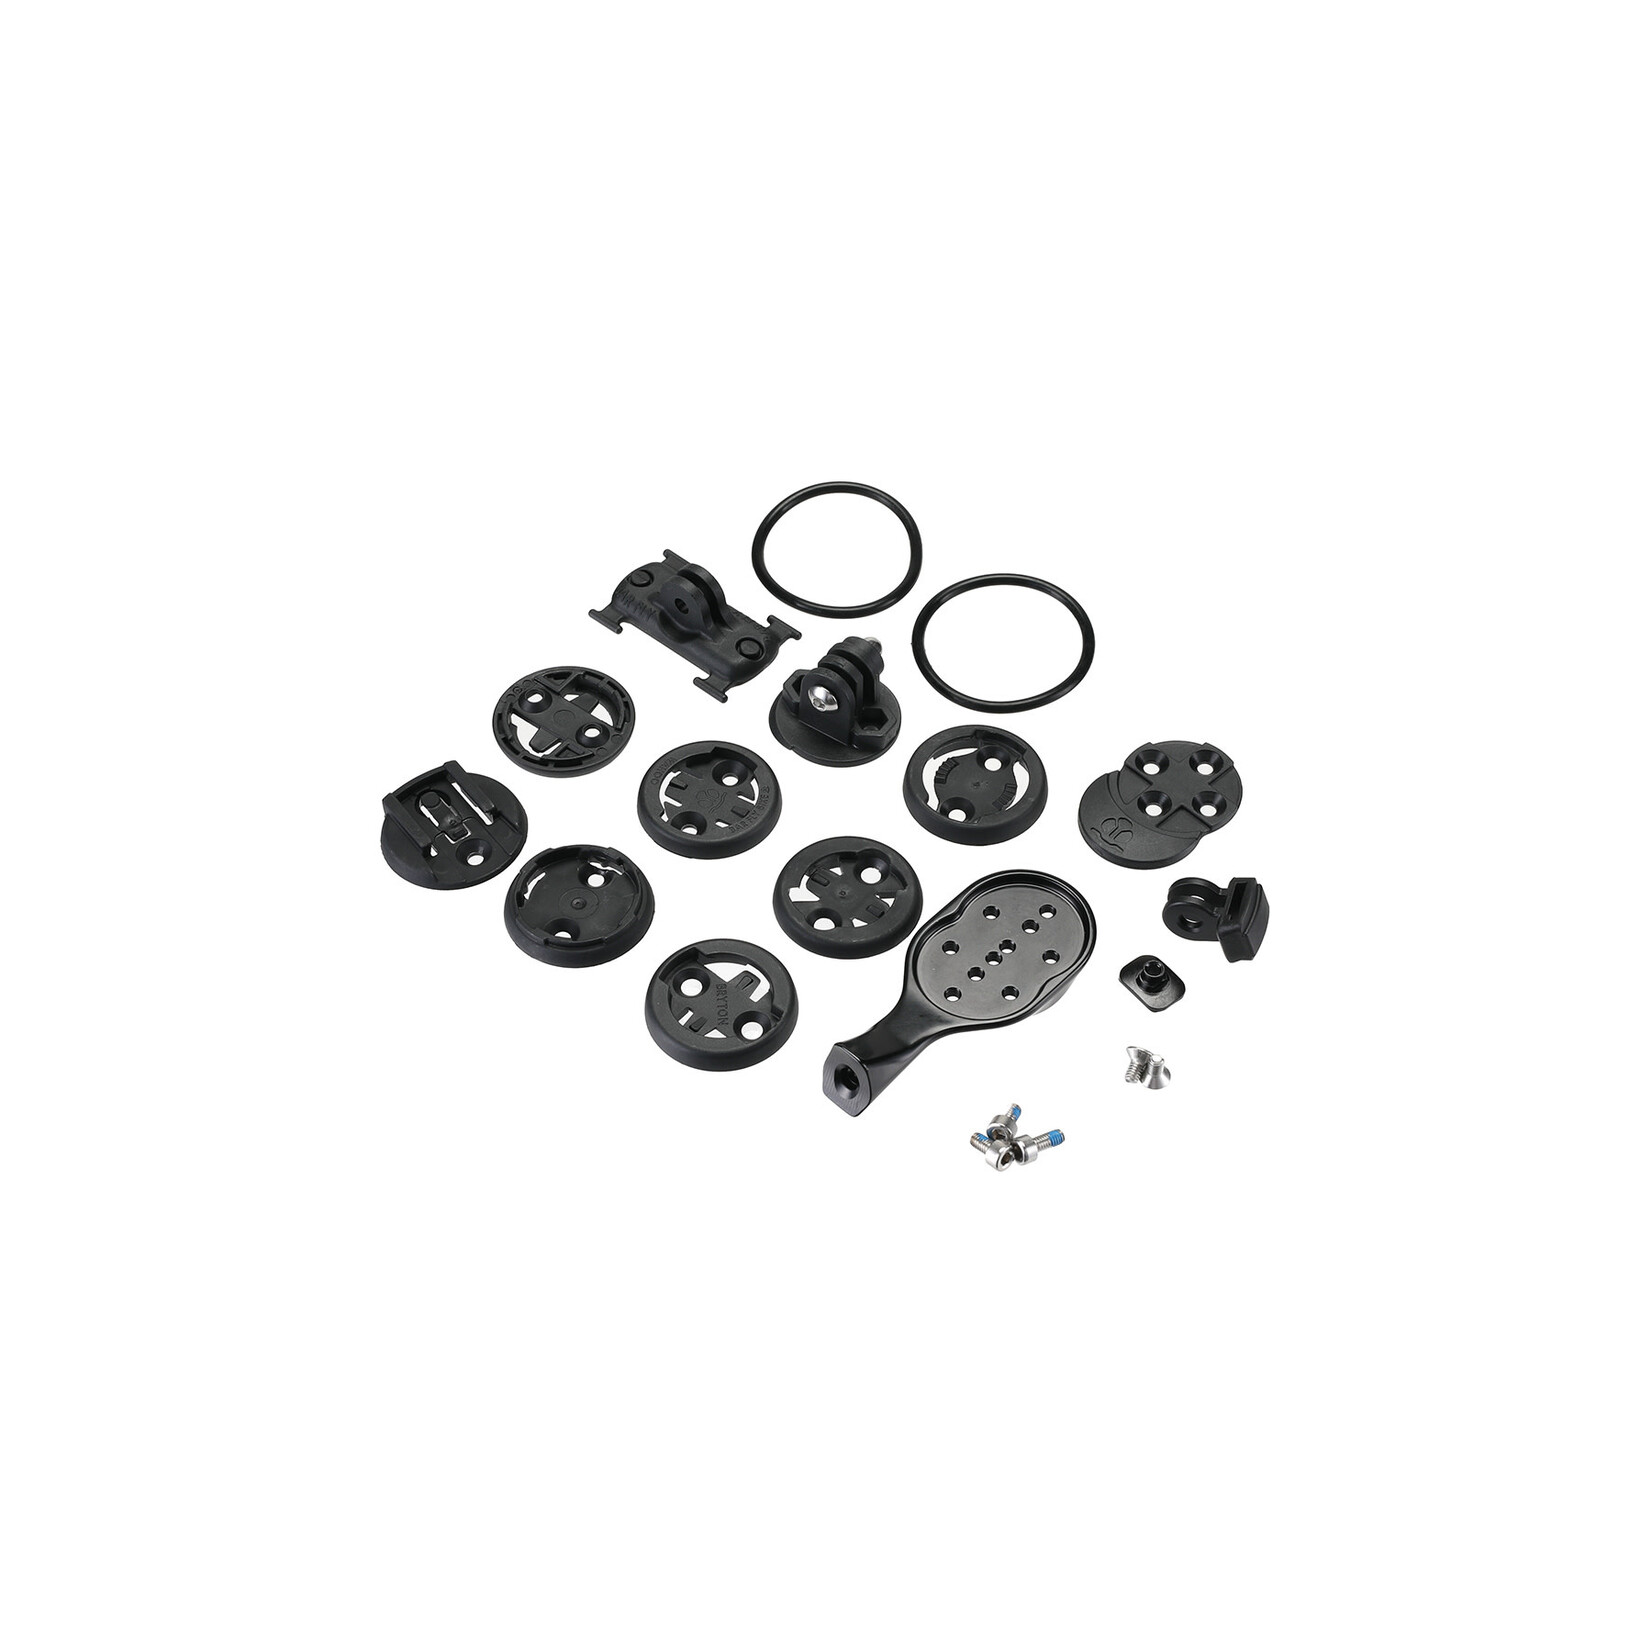 Specialized SBC Accessory Mount Kit (Compatible With Bryton, Cateye, GoPro, Joule, Mio, Polar and Wahoo)